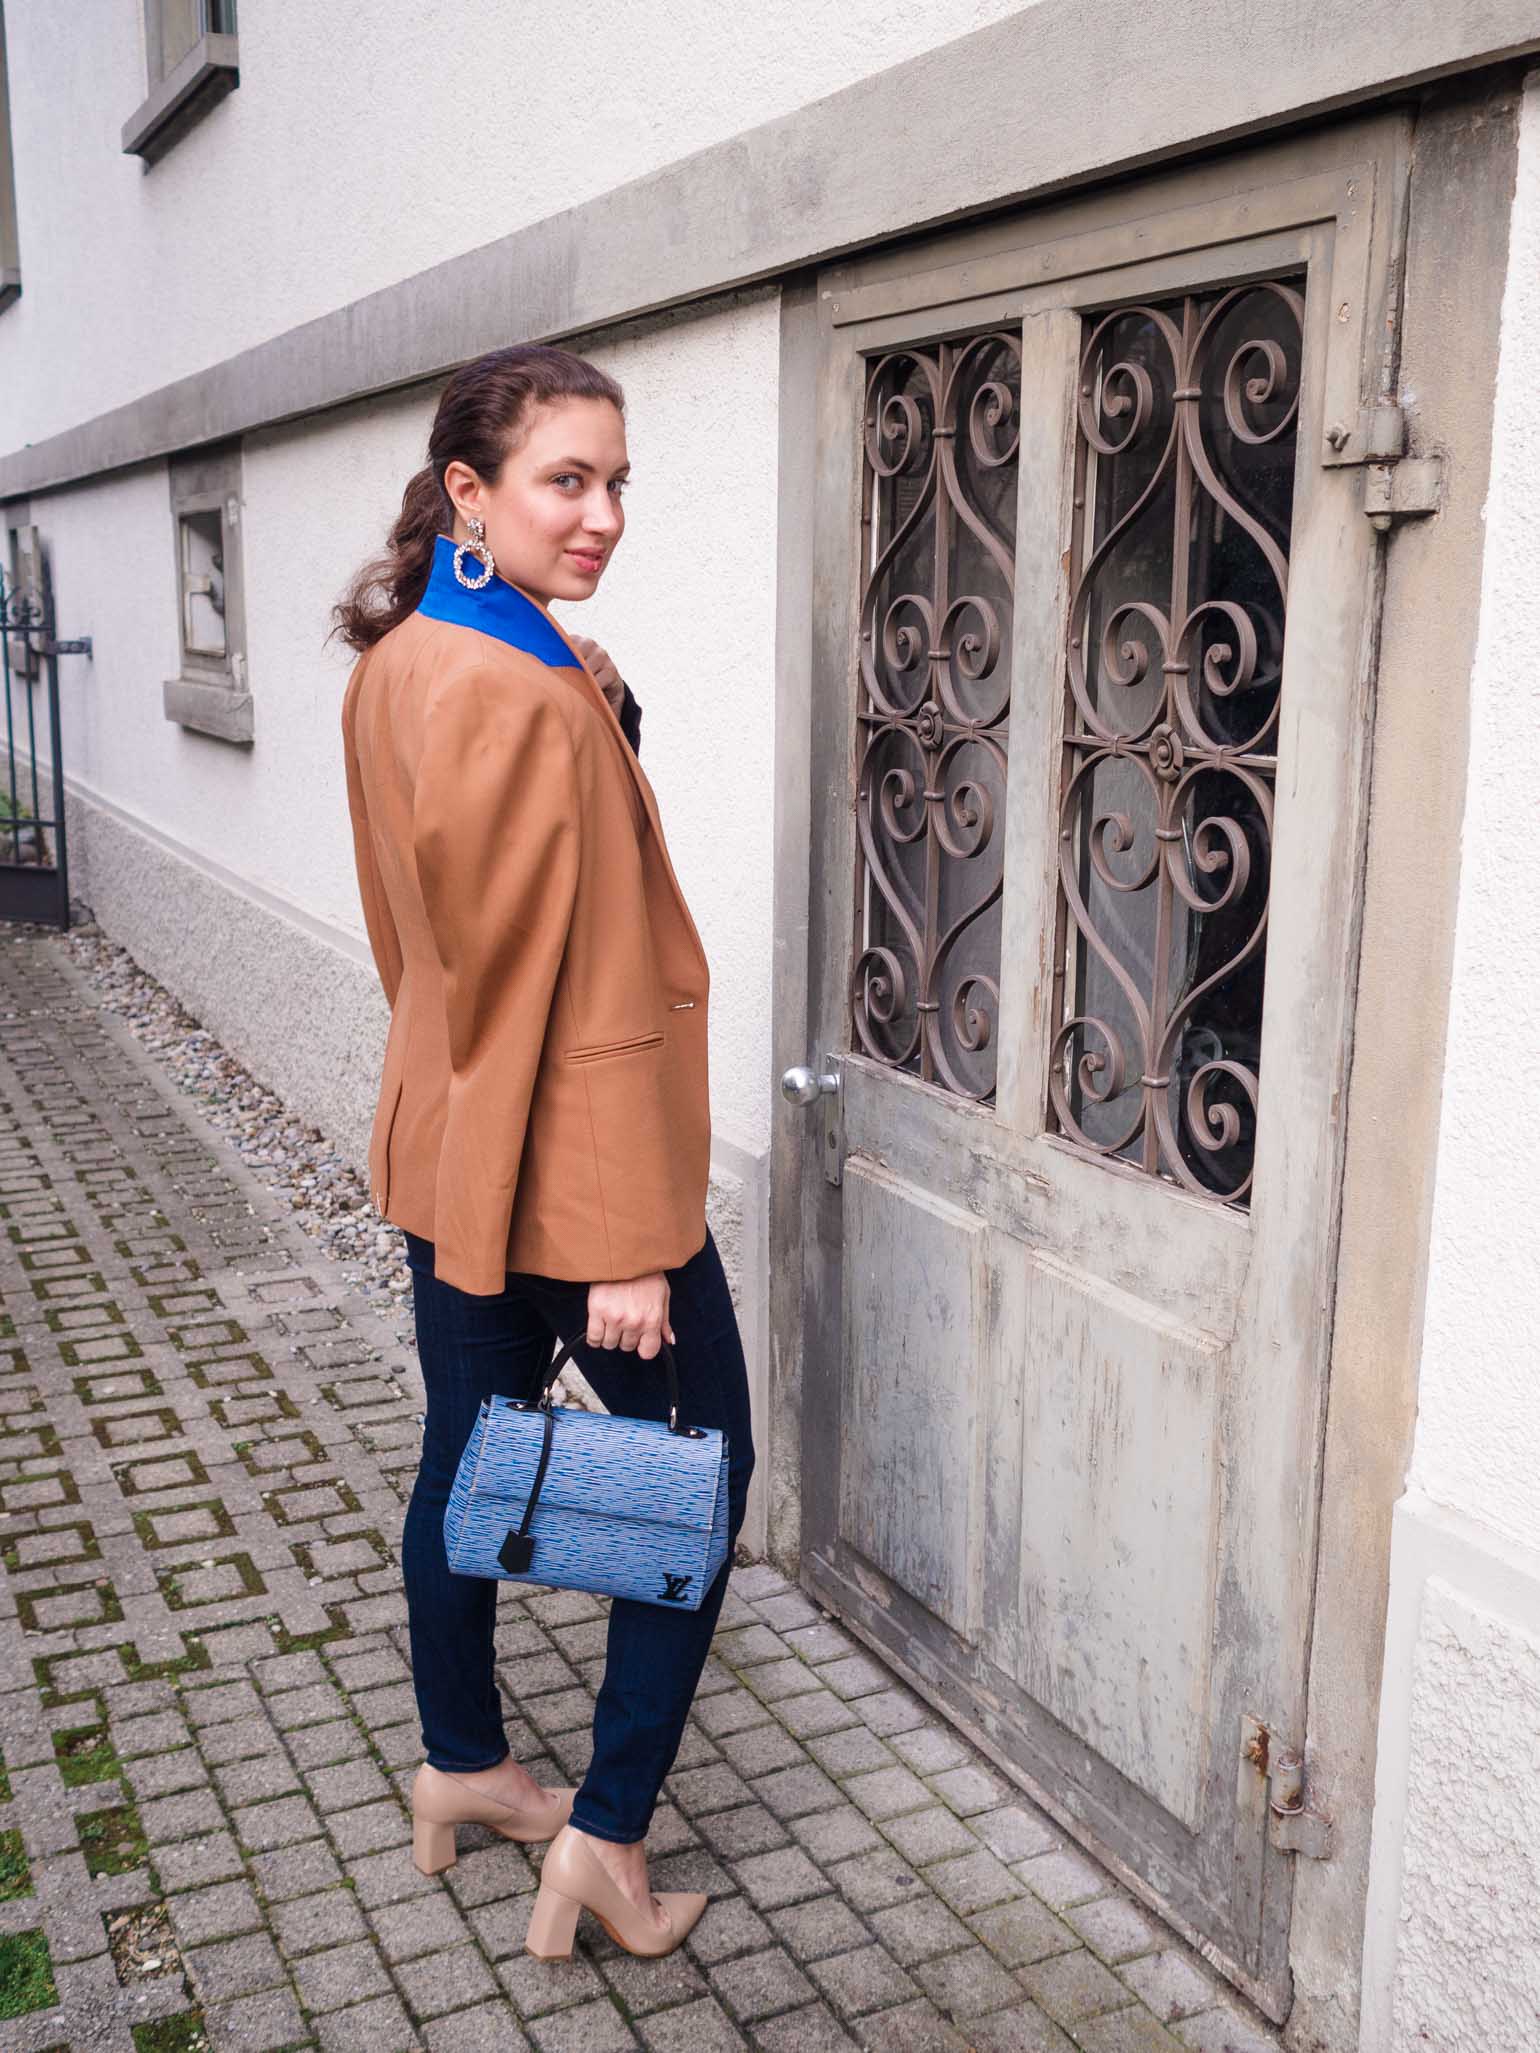 Cristina from The Brunette Nomad, Dallas and Swiss based fashion blogger, shares how to look instantly chic this season with a J.Crew camel blazer